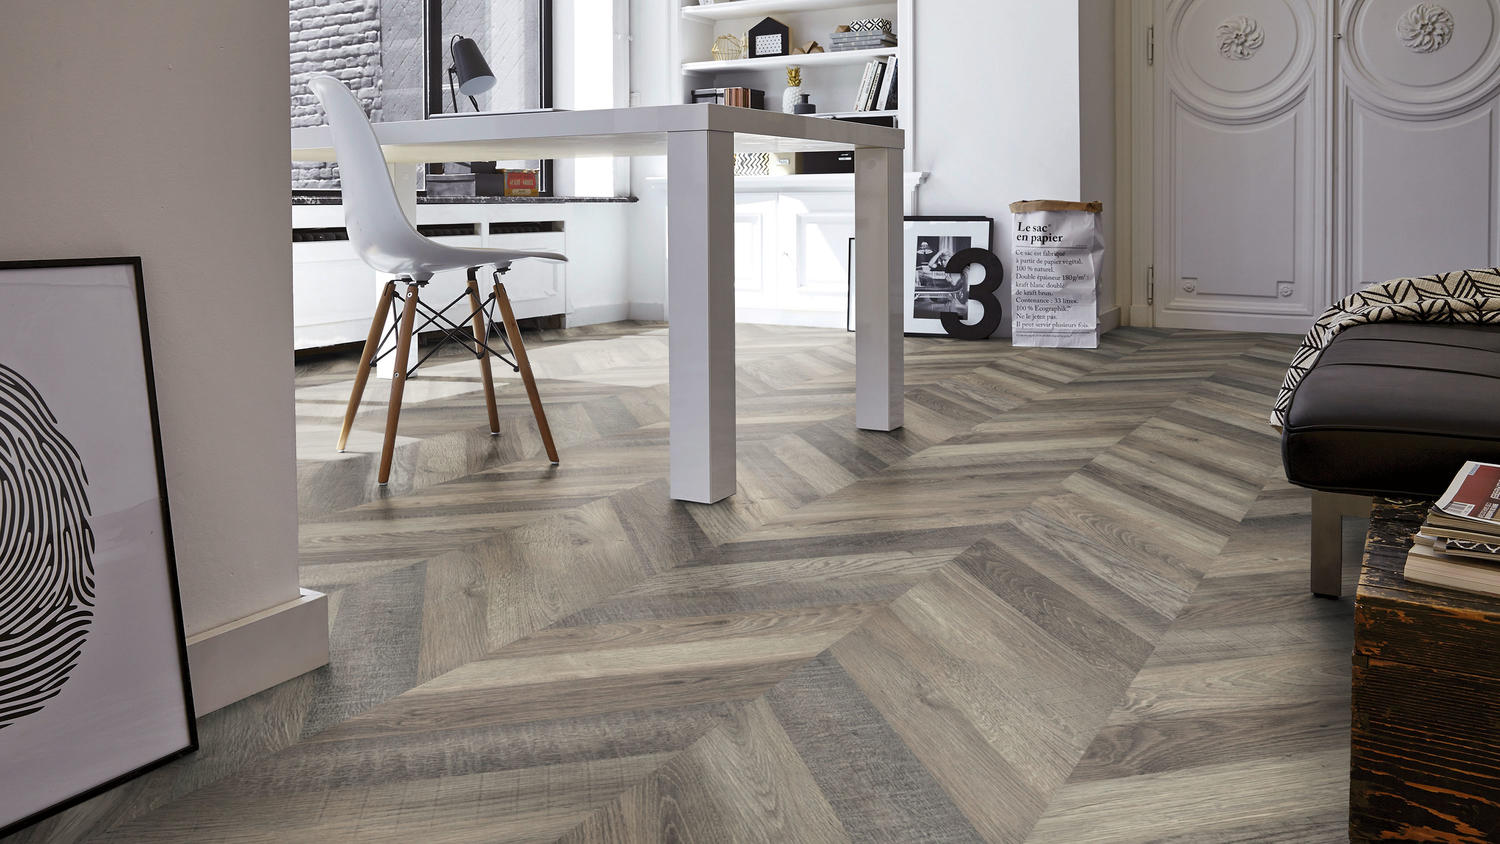 Laminate Floor Designs And Colours, Laminate Flooring Patterns And Colors